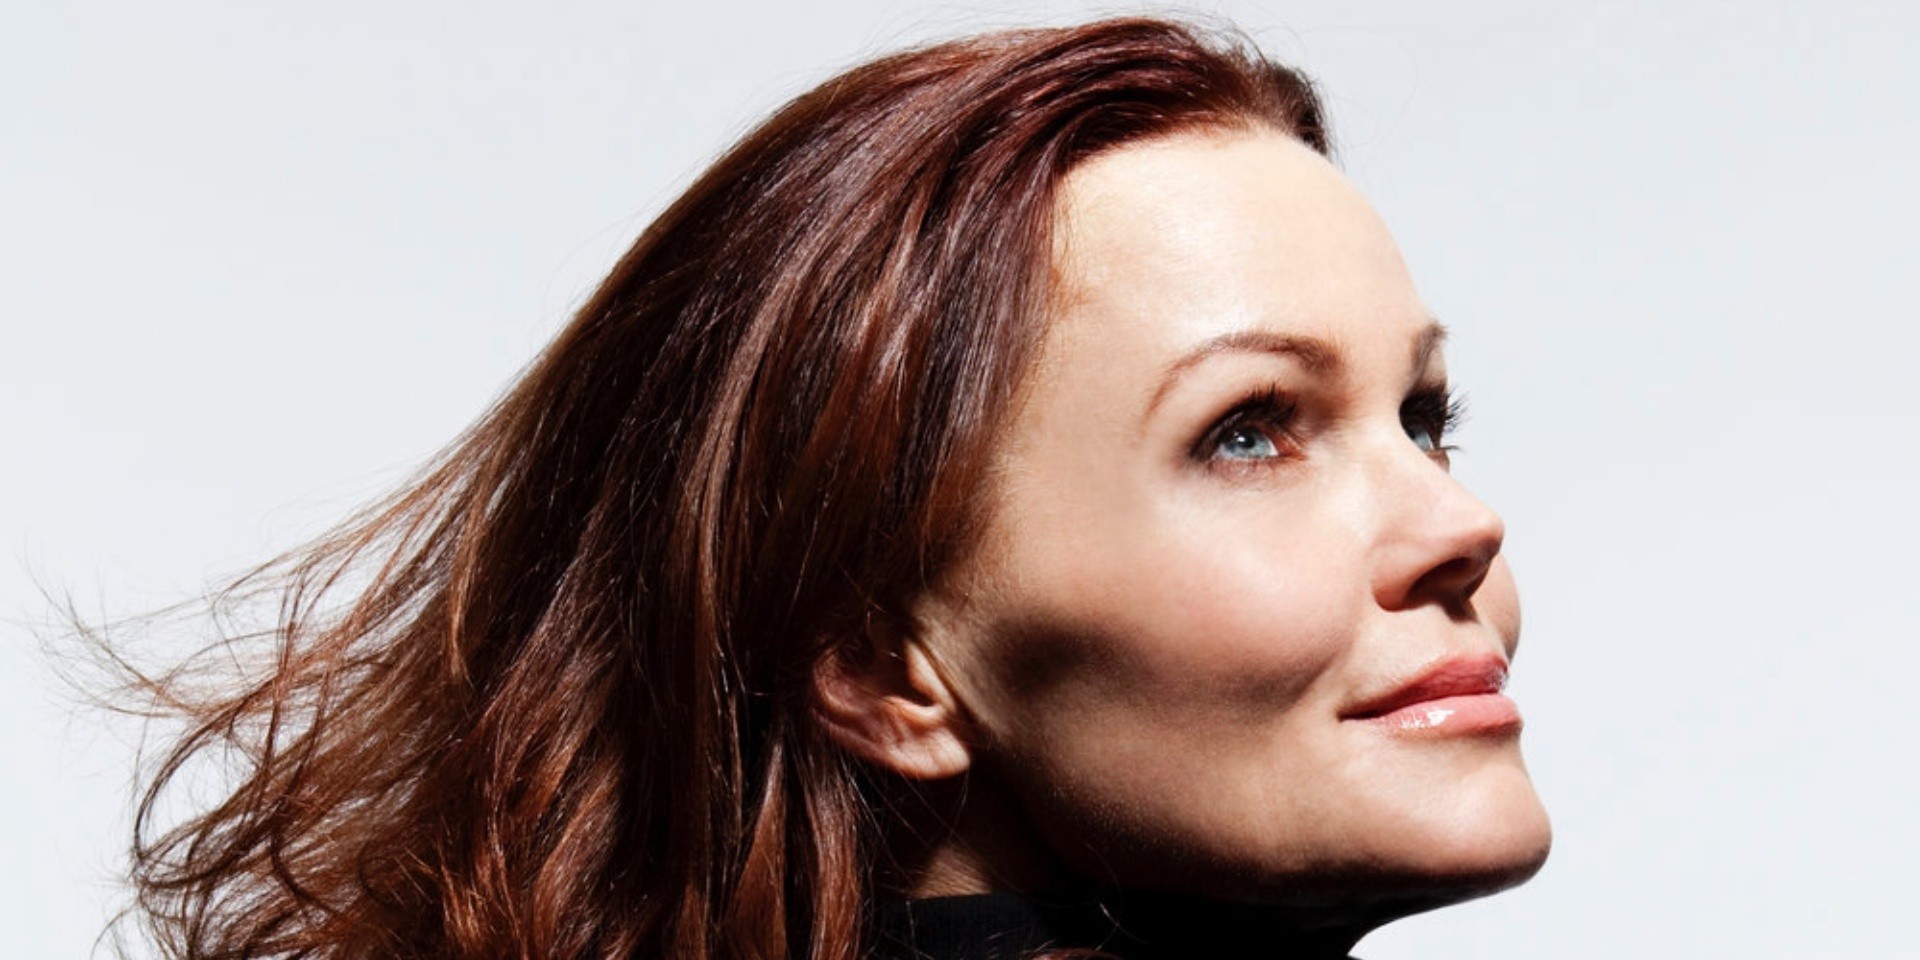 Belinda Carlisle to play in Singapore for 30th Anniversary Tour next year